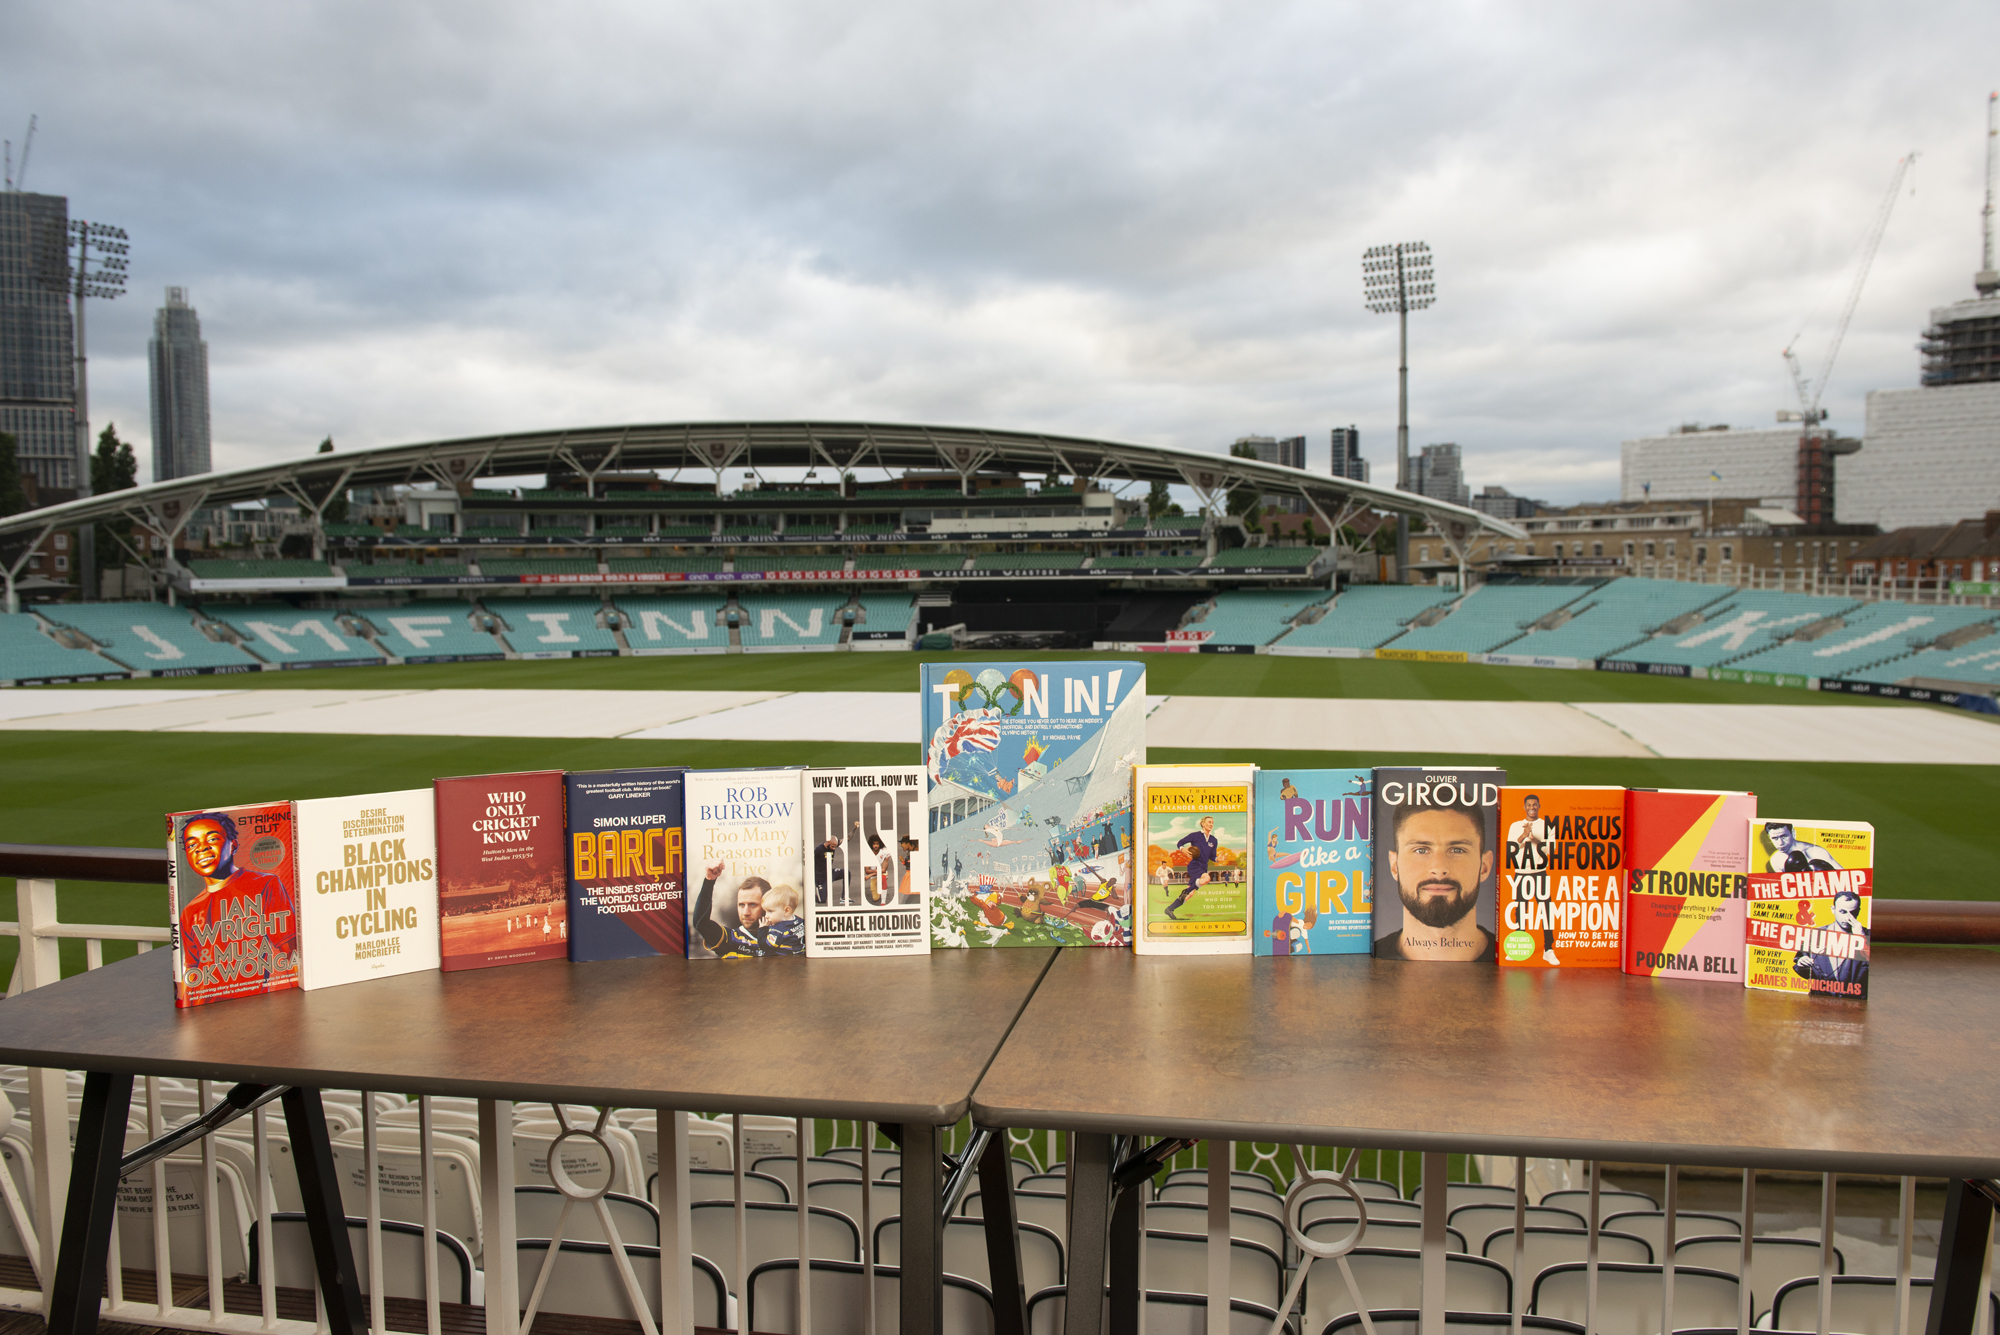 The Sports Book Awards Winners 2022, In Association with the Sunday Times., stacked at the Kia Oval.